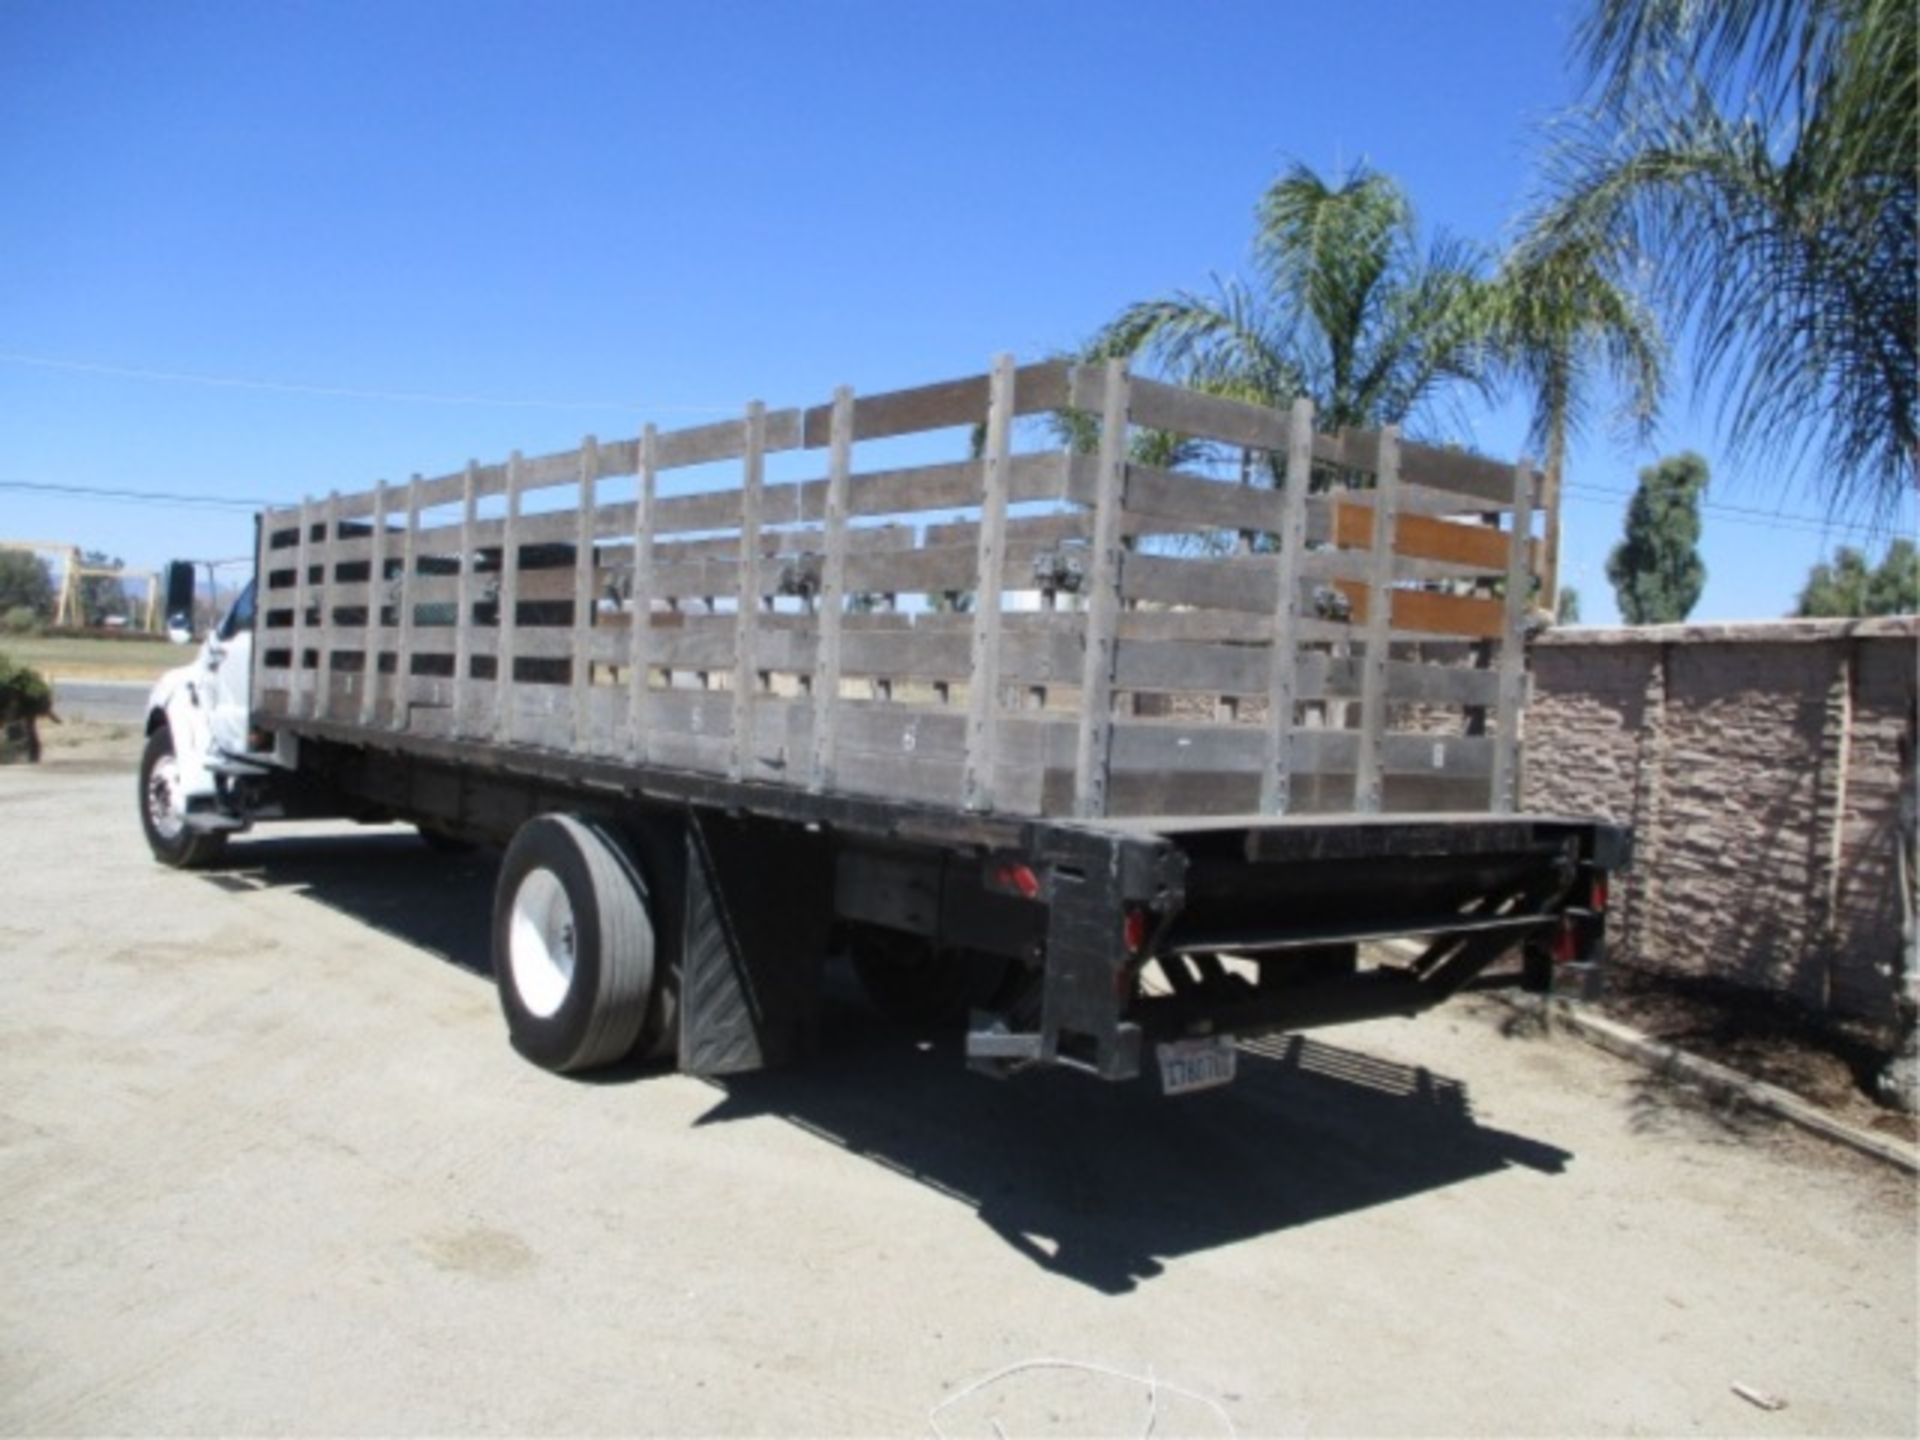 2005 Ford F650 S/A Flatbed Stakebed Truck, Cat C7 Acert 7.2L 6-Cyl Diesel, Automatic, Lift Gate, 24' - Image 23 of 61